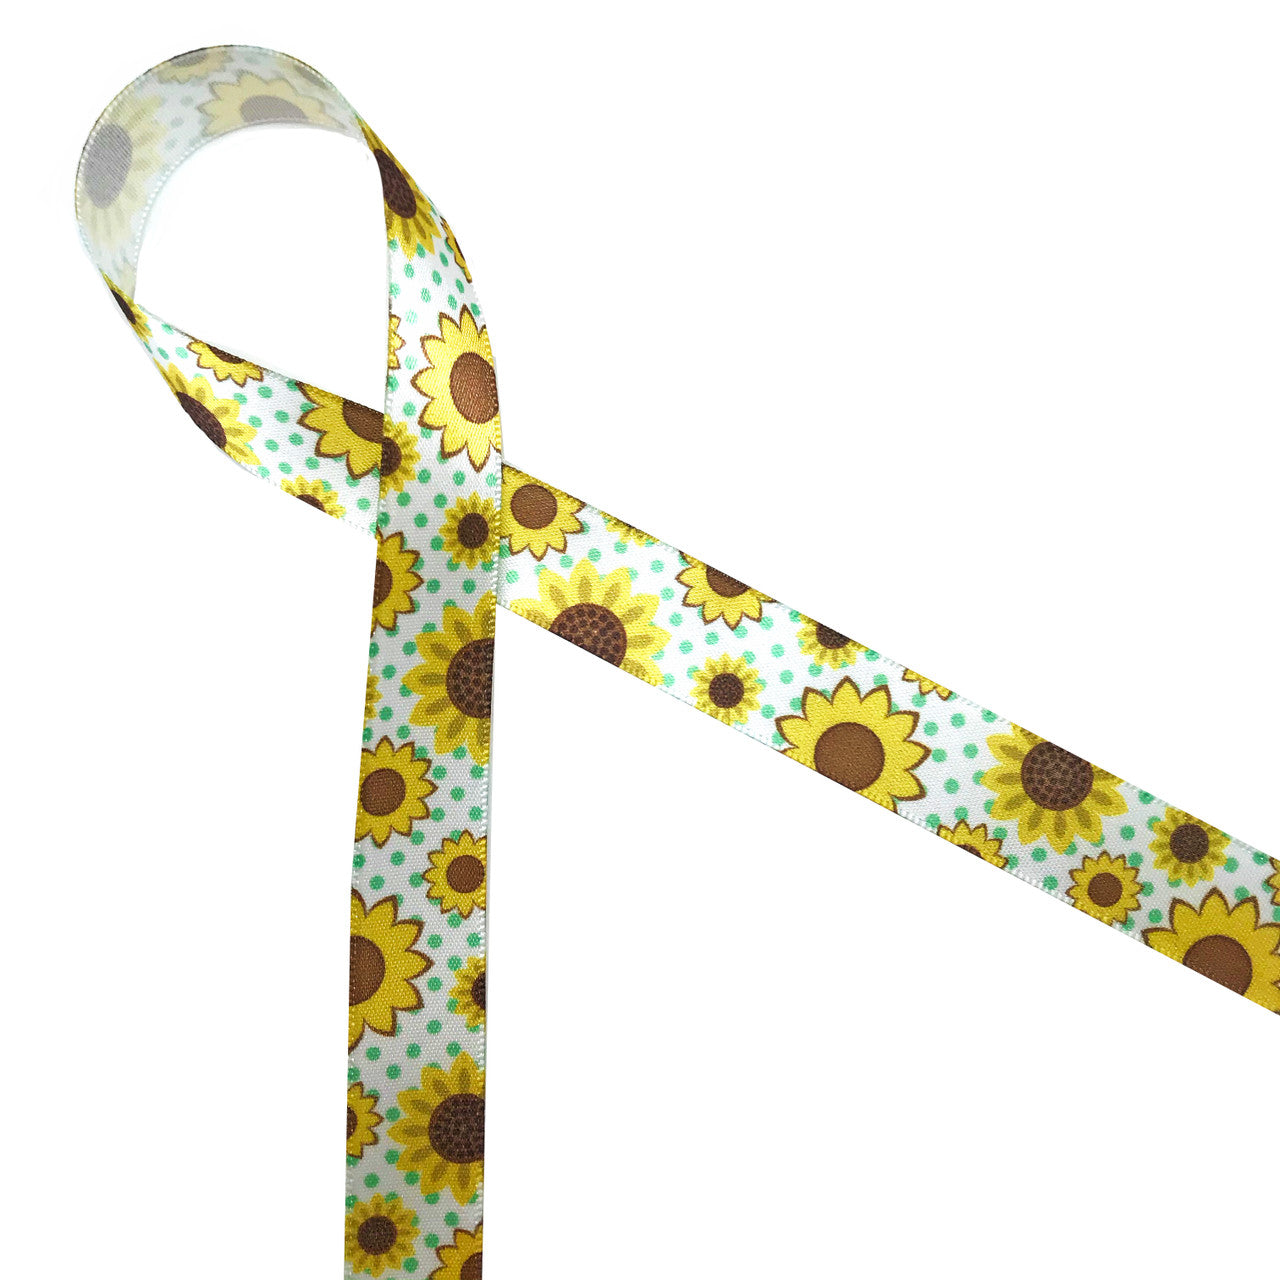 Sunflowers in brown and yellow with a green polka dot background is a sweet ribbon, perfect for a Summer soiree!